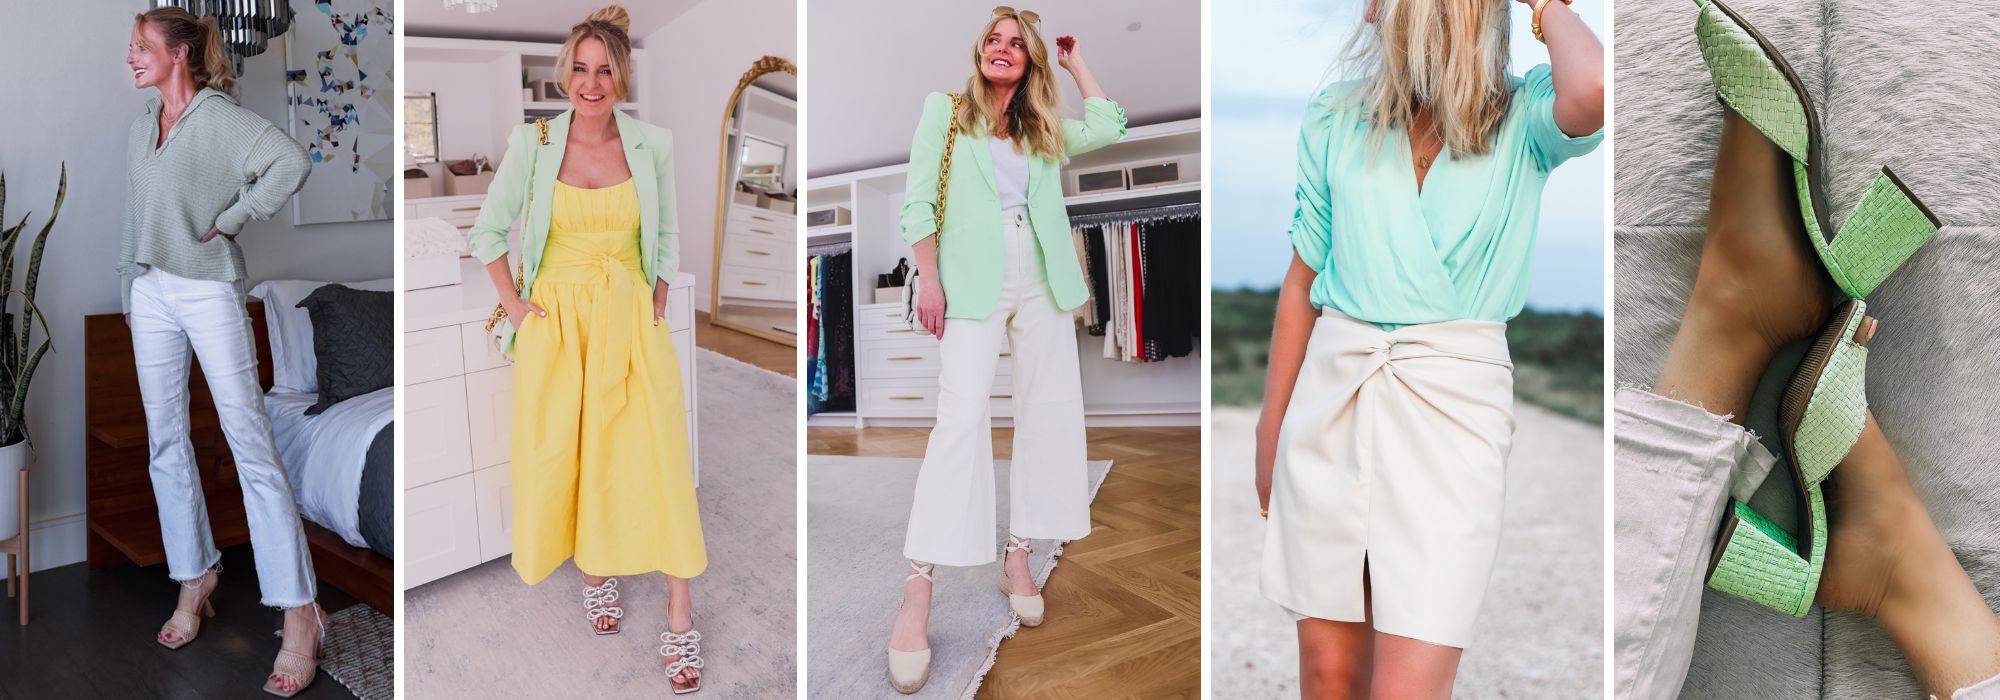 mint green fashion trend, mint green outfits